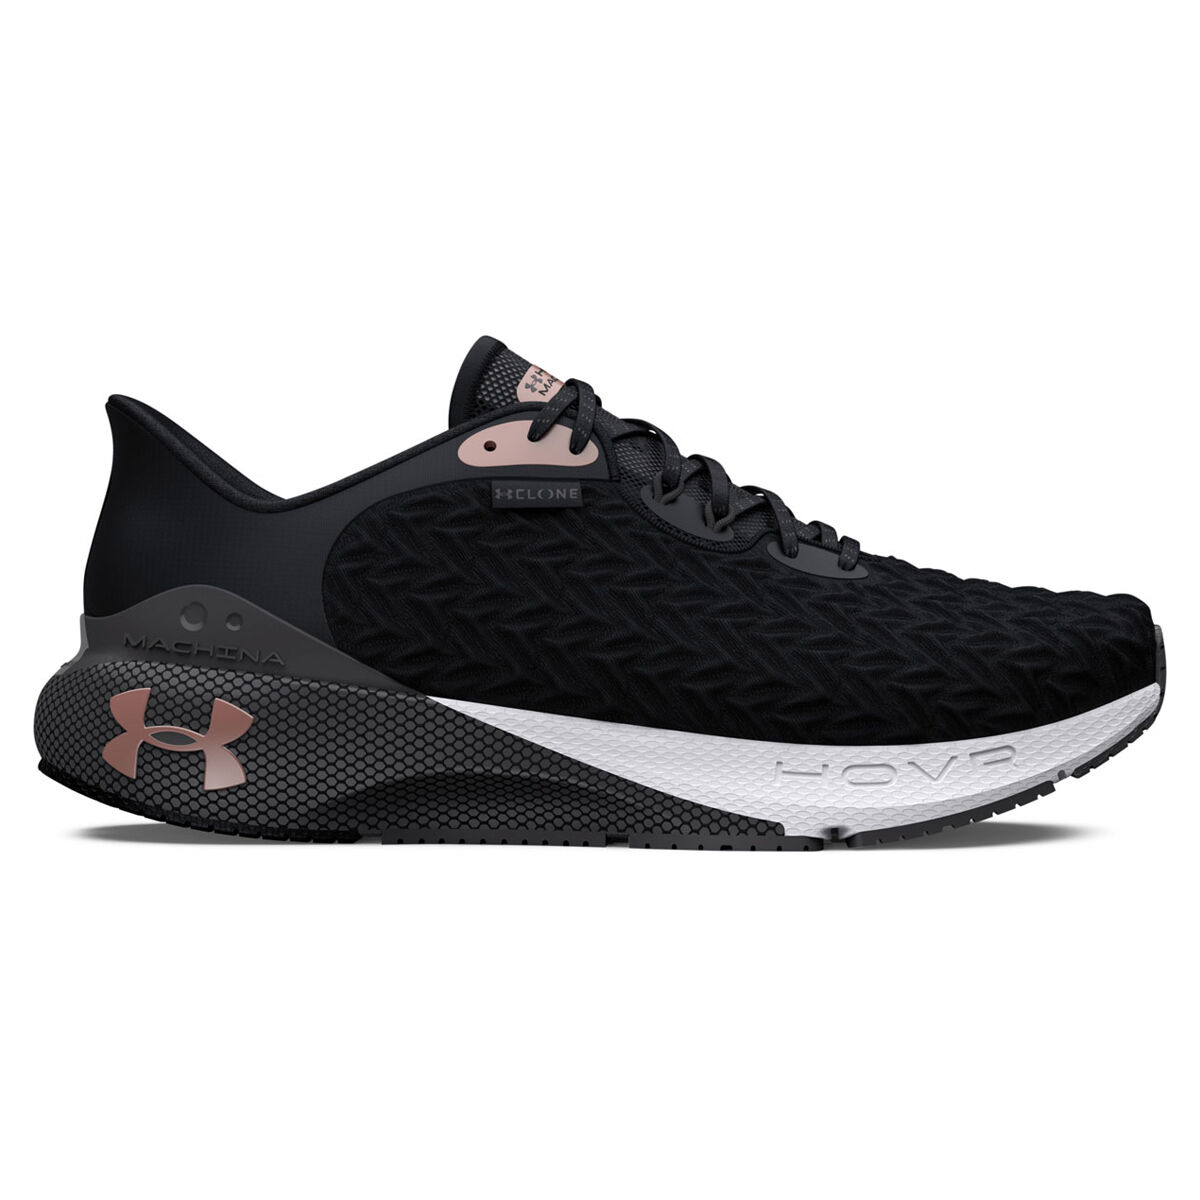 Under Armour HOVR Machina 3 Womens Running Shoes | Rebel Sport